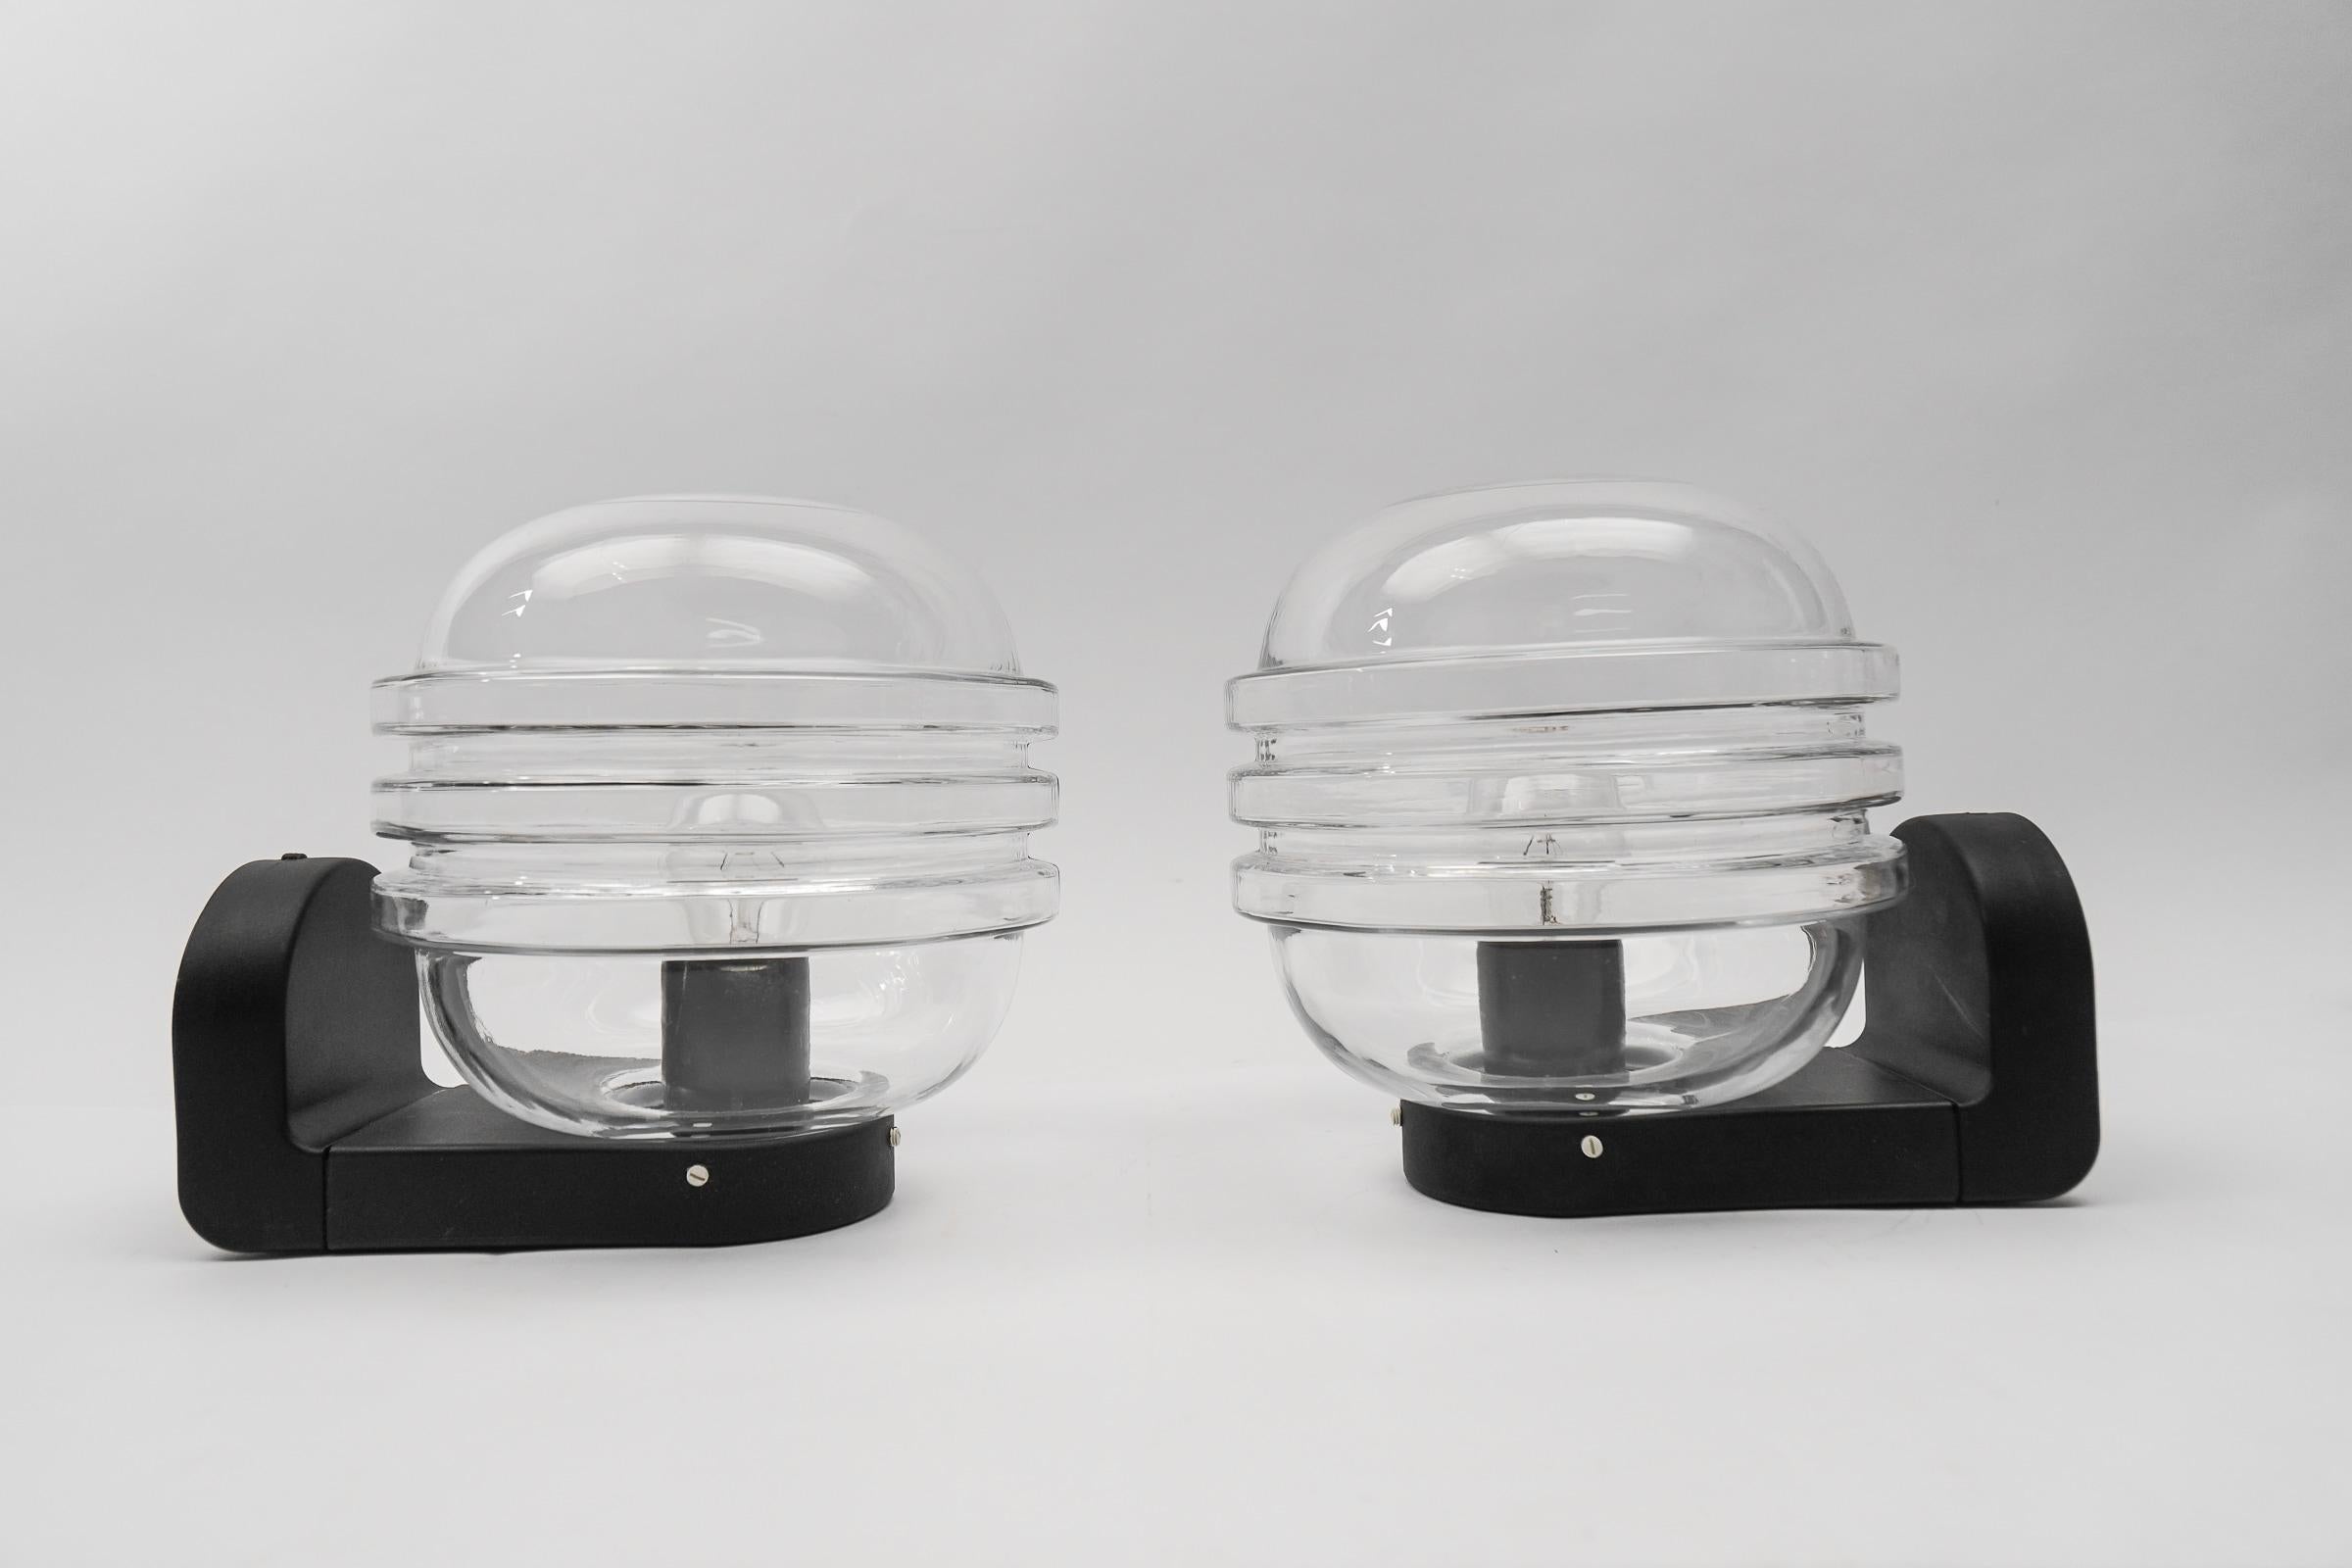 Pair of Space Age Outdoor Wall Lamps in Black and Clear Glass, 1970s For Sale 8